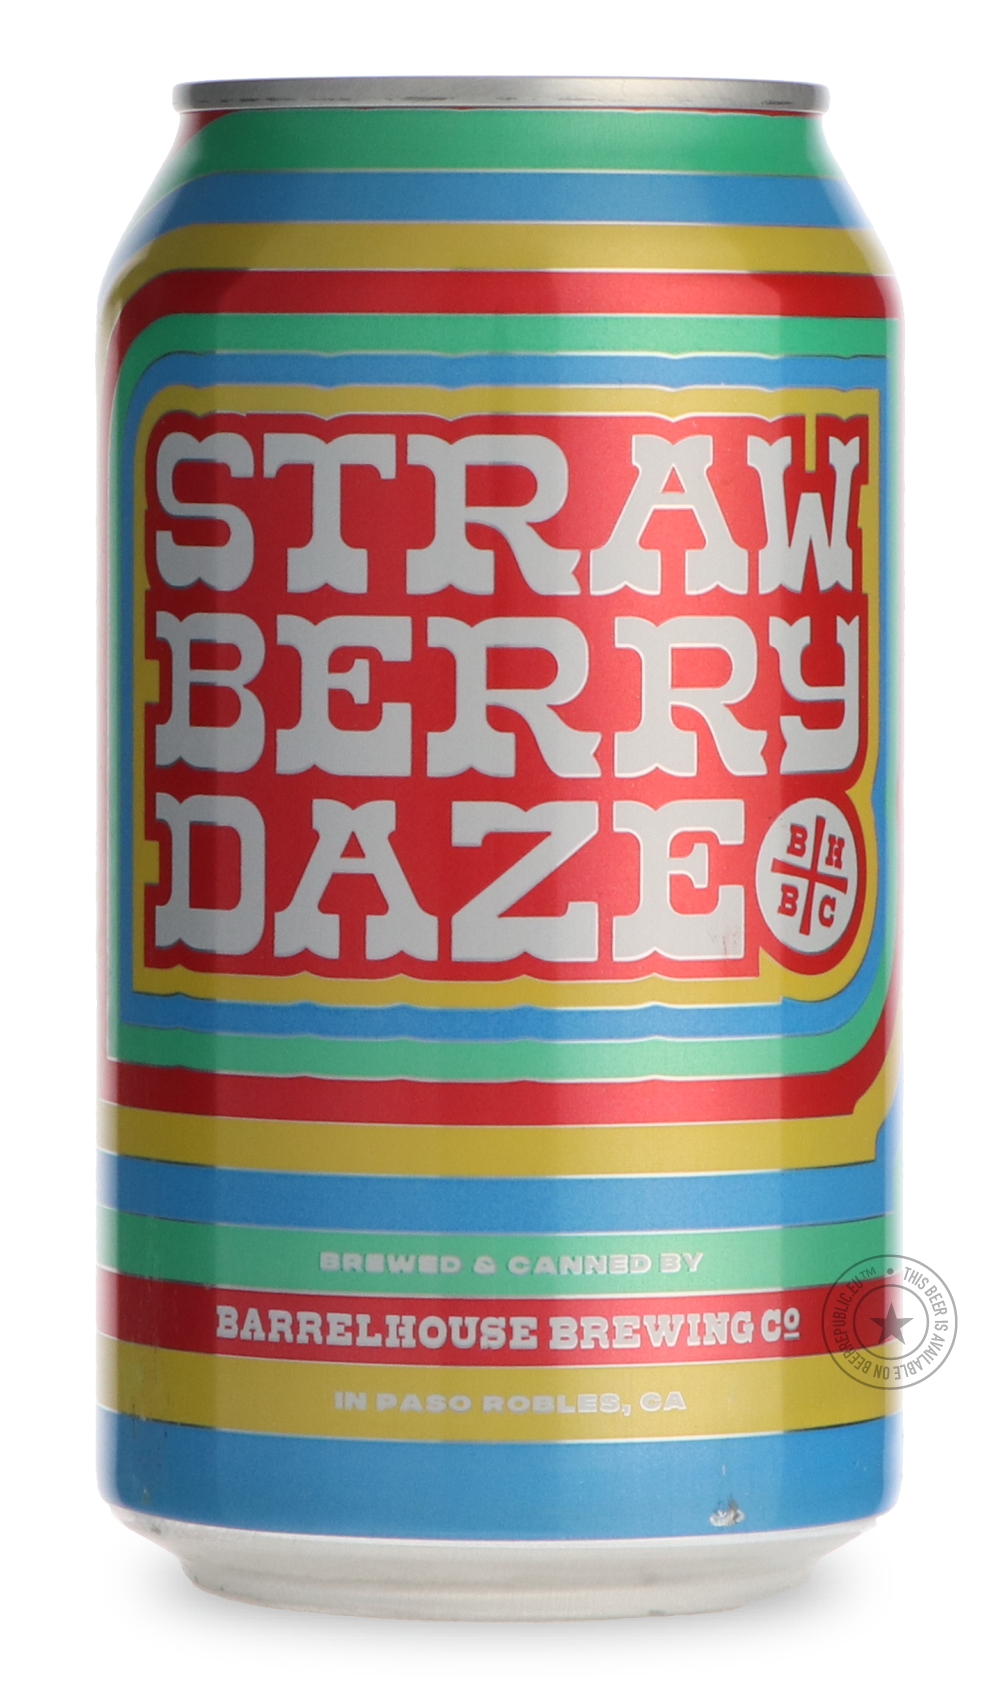 -BarrelHouse- Strawberry Daze-Pale- Only @ Beer Republic - The best online beer store for American & Canadian craft beer - Buy beer online from the USA and Canada - Bier online kopen - Amerikaans bier kopen - Craft beer store - Craft beer kopen - Amerikanisch bier kaufen - Bier online kaufen - Acheter biere online - IPA - Stout - Porter - New England IPA - Hazy IPA - Imperial Stout - Barrel Aged - Barrel Aged Imperial Stout - Brown - Dark beer - Blond - Blonde - Pilsner - Lager - Wheat - Weizen - Amber - Ba